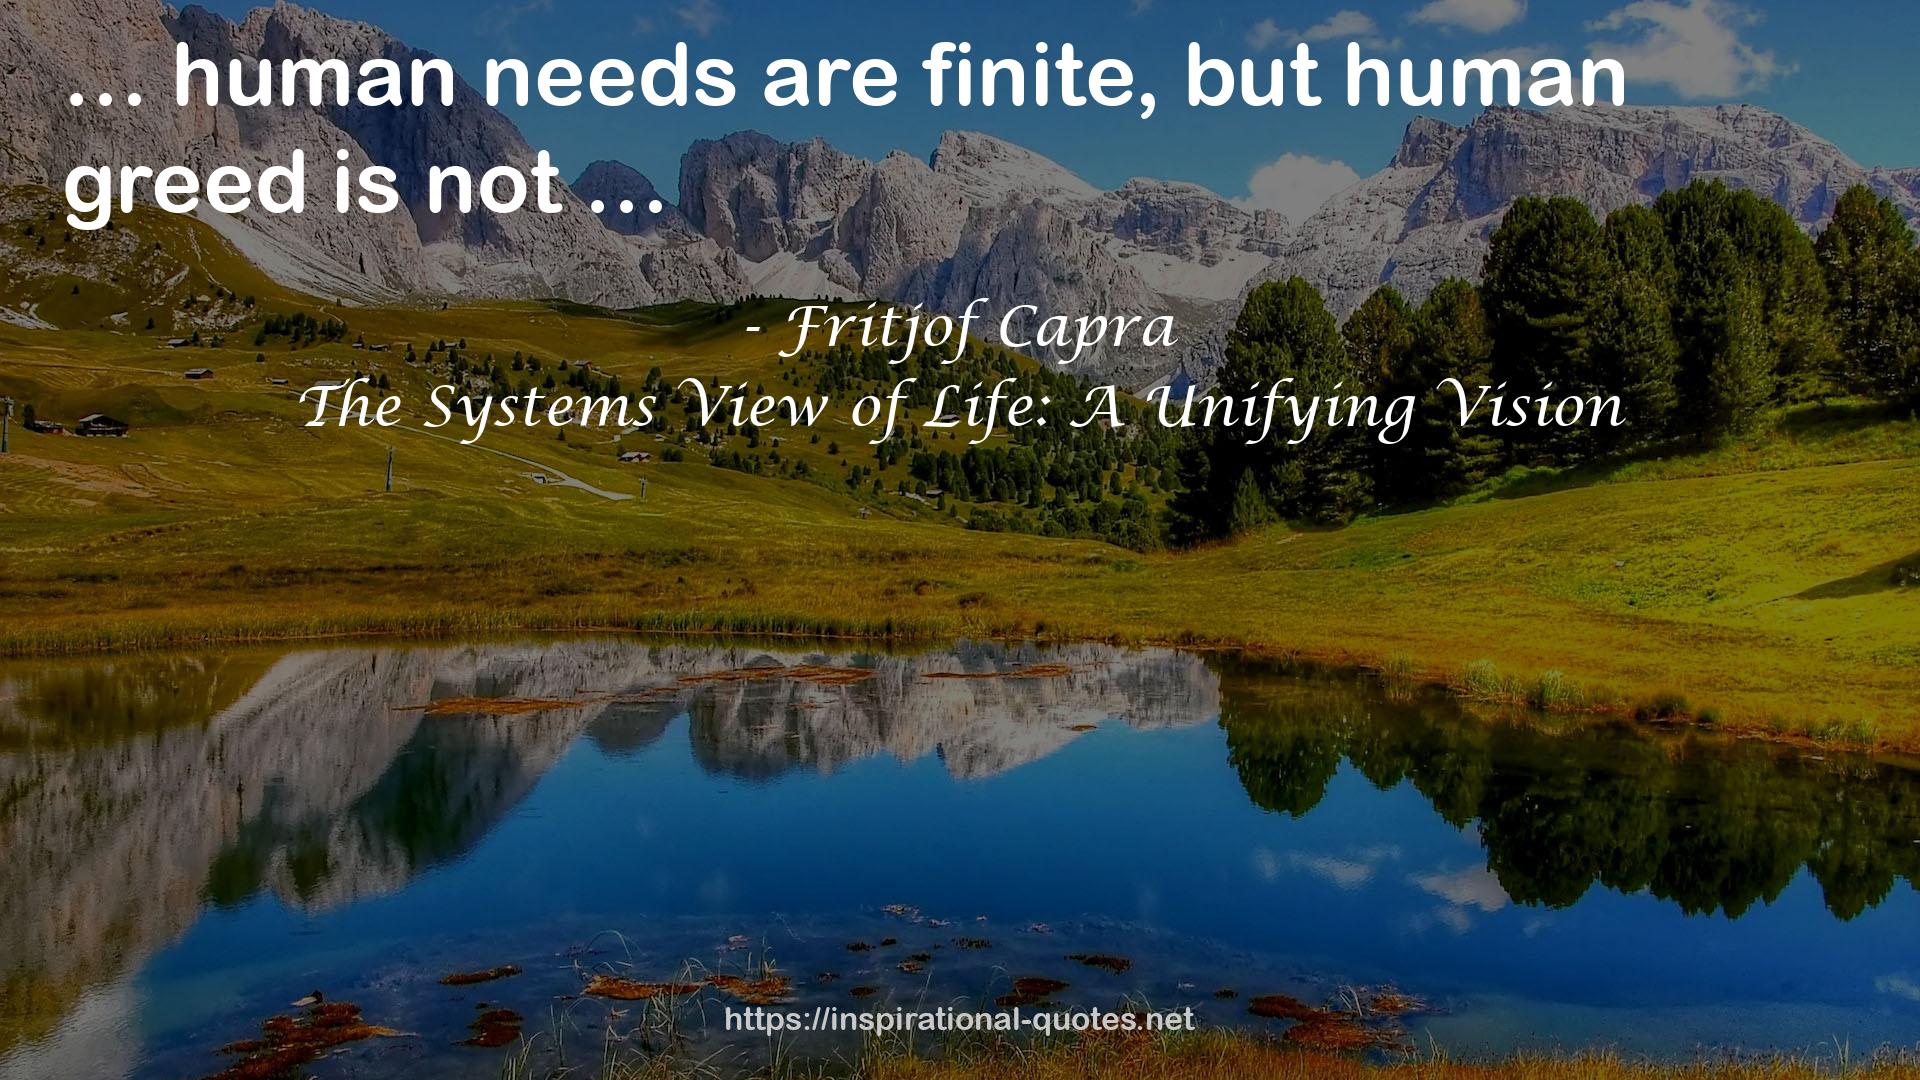 The Systems View of Life: A Unifying Vision QUOTES